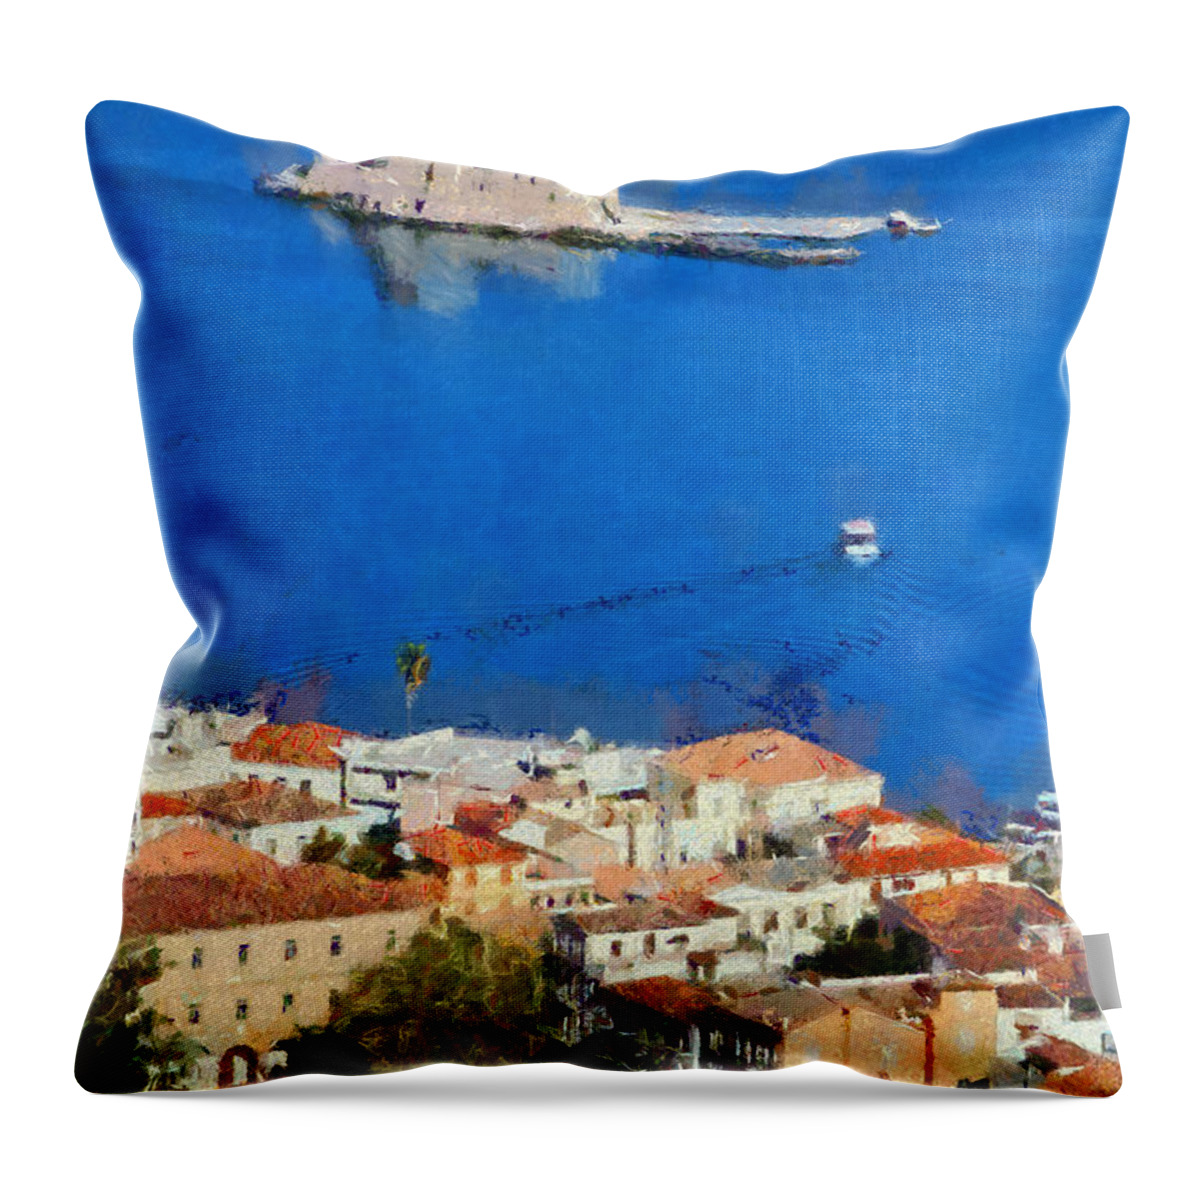 Bourtzi Throw Pillow featuring the painting Nafplio and Bourtzi fortress by George Atsametakis